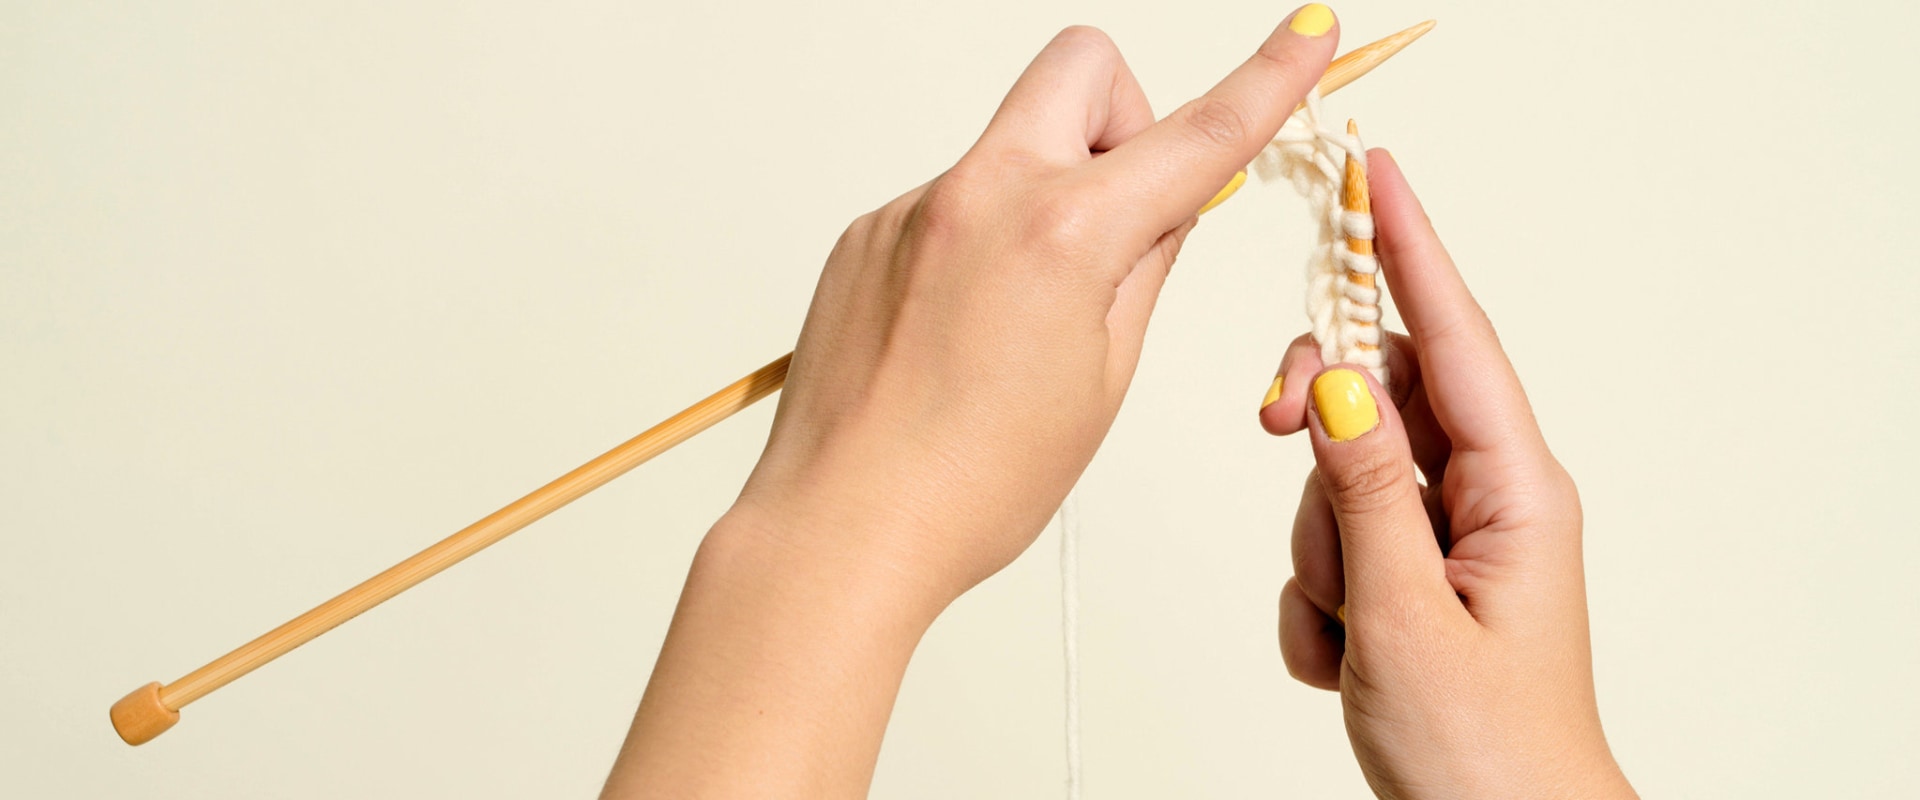 How Long Does it Take to Learn Knitting?